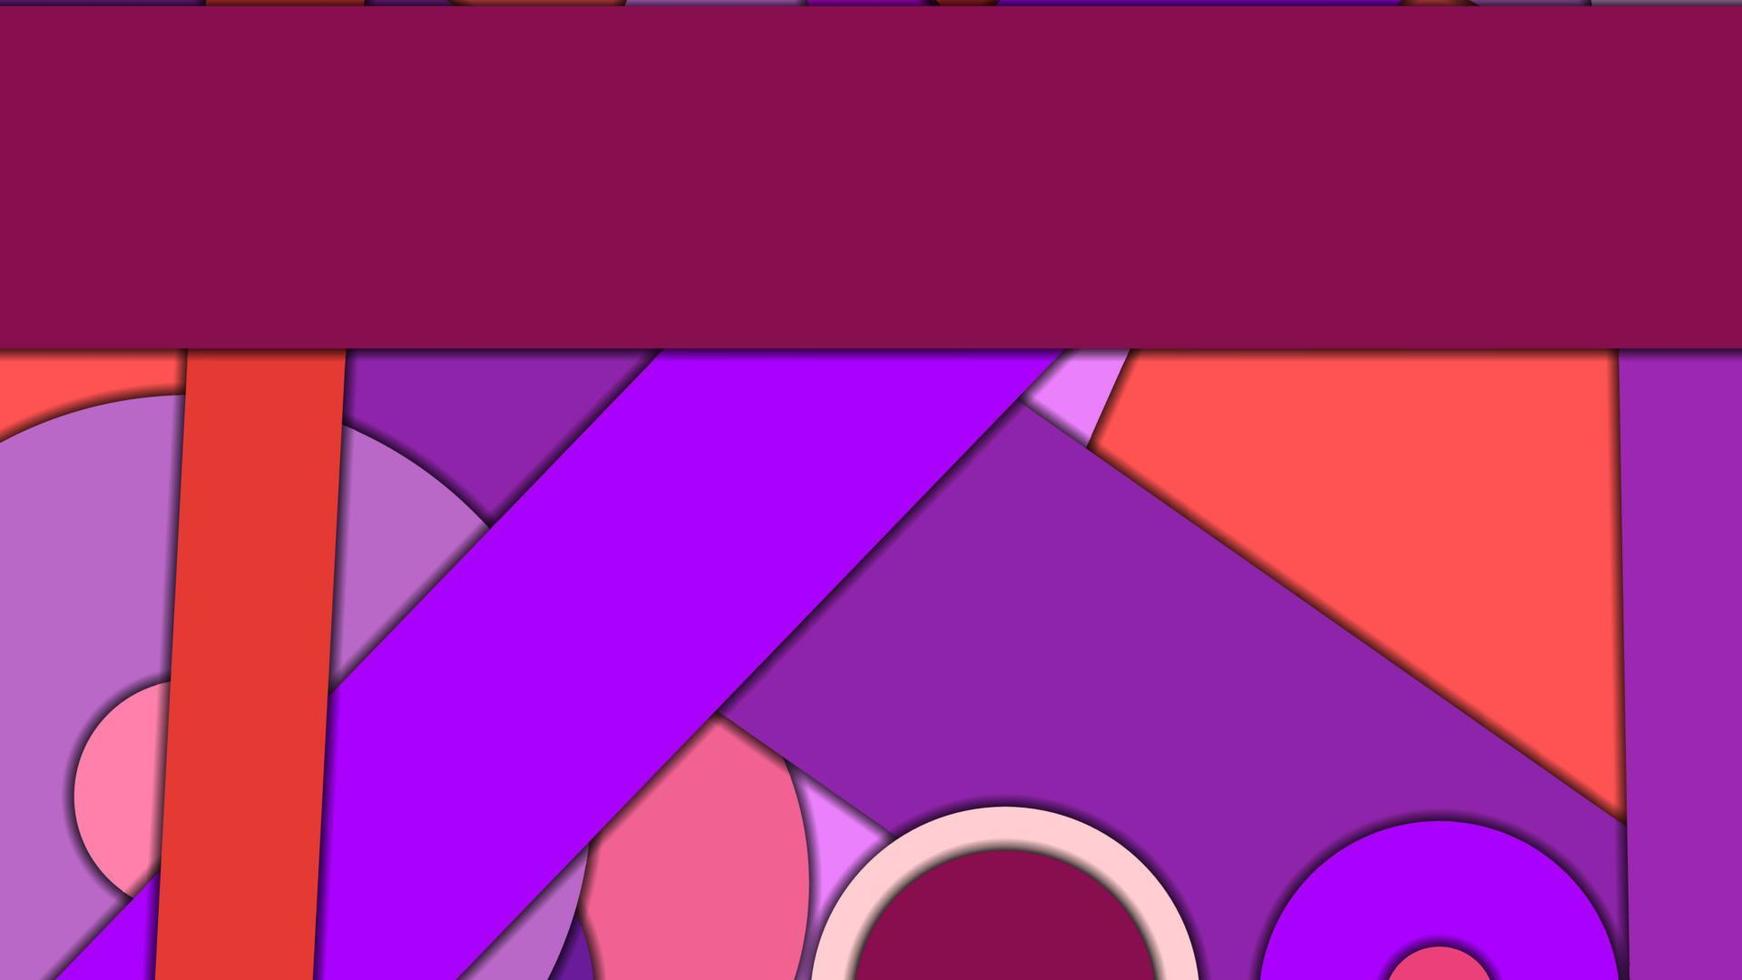 Abstract geometric vector background in Material design style with a limited harmonized palette, with concentric circles and rotated rectangles with shadows, imitating cut paper.